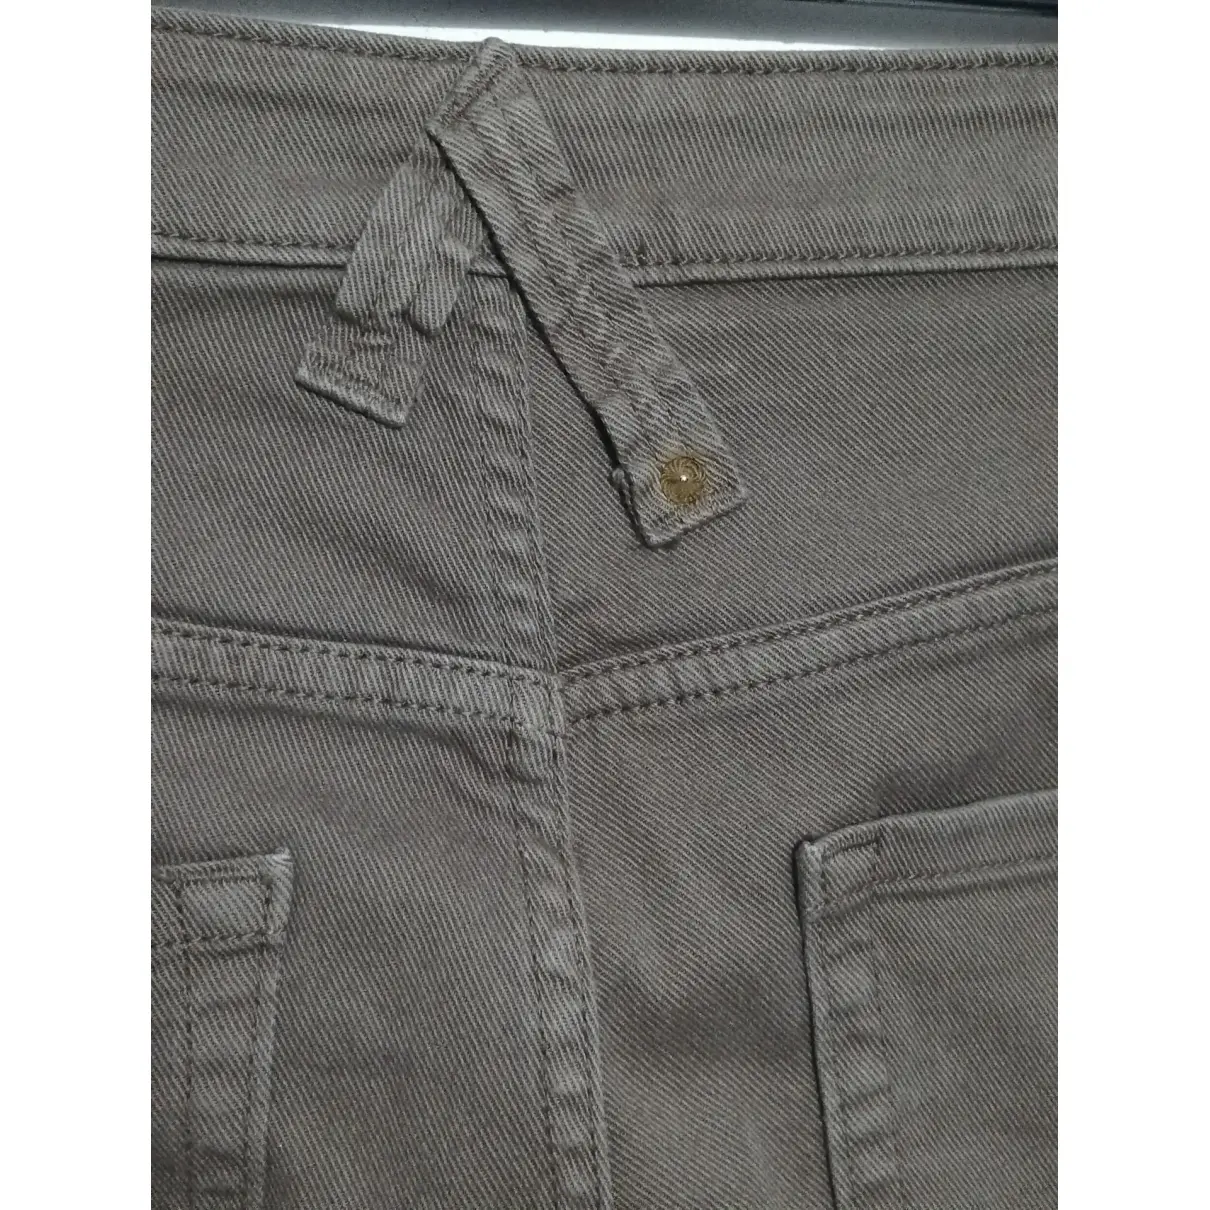 Buy Cycle Straight pants online